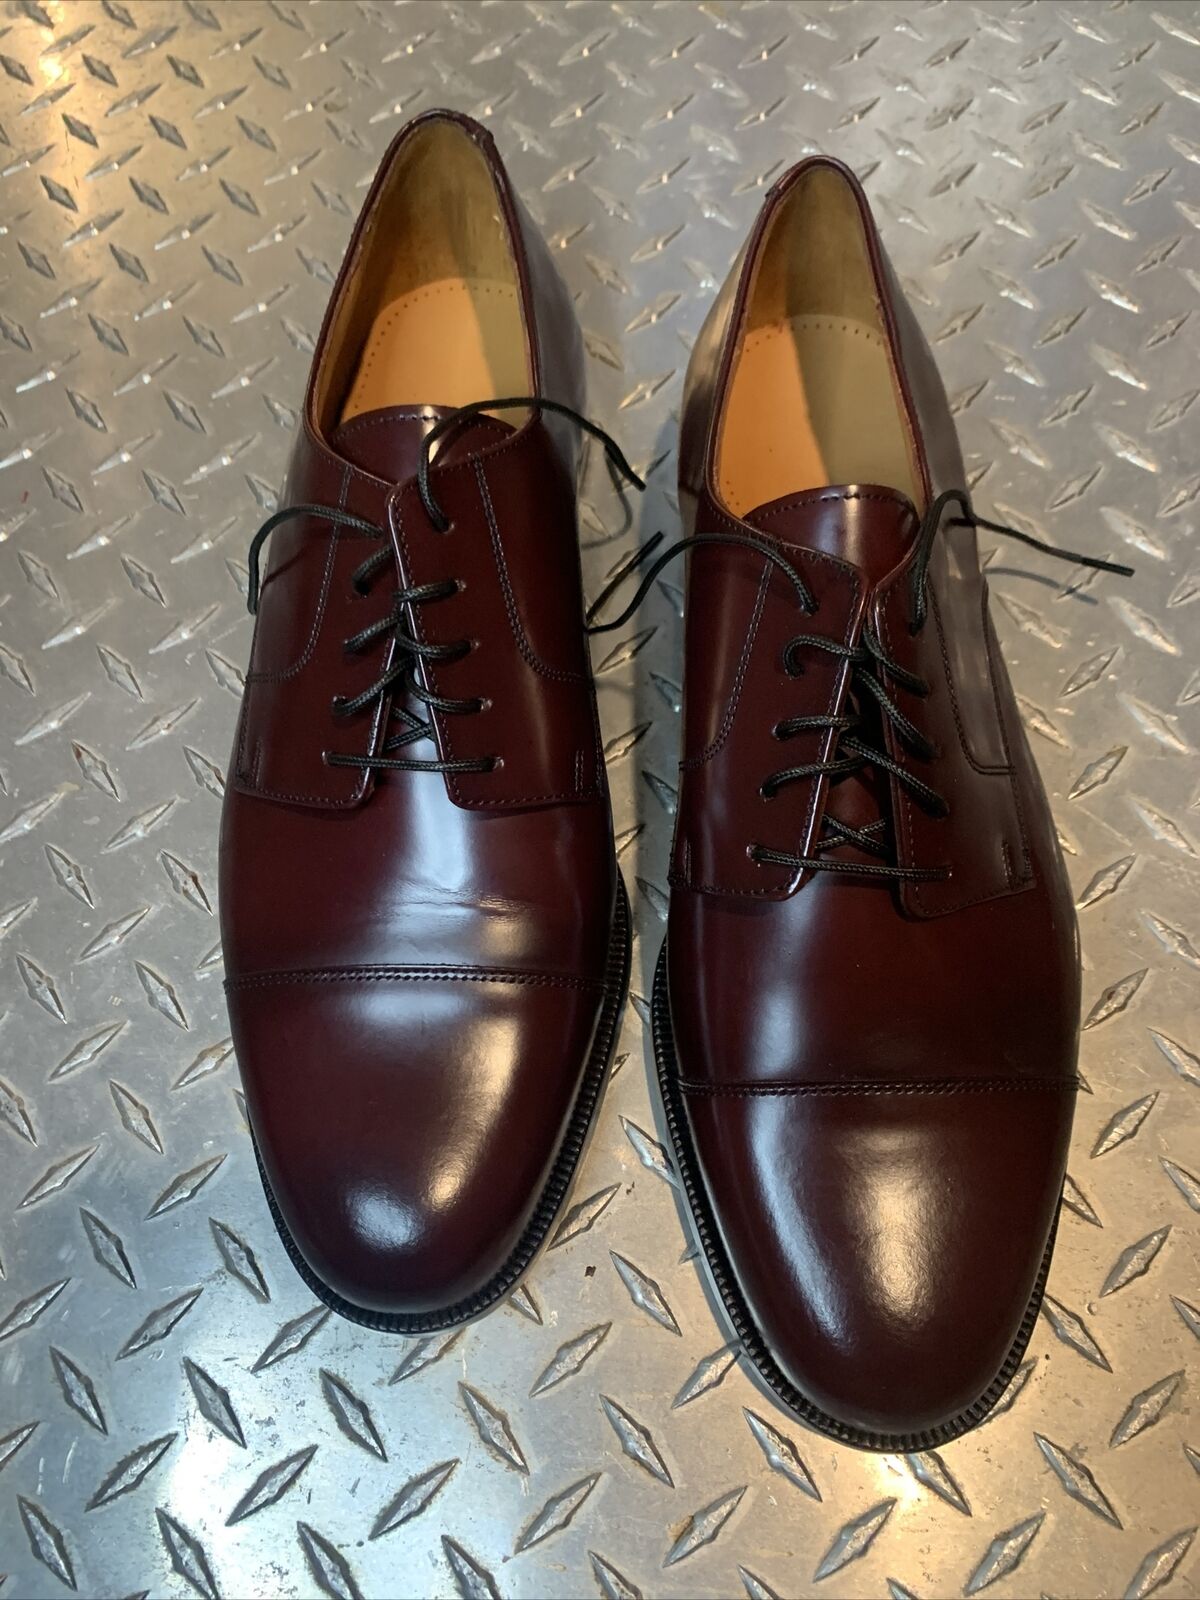 Cole Haan Caldwell Men’s Oxfords Burgundy Leather Dress Shoes 08331 Size 11 D